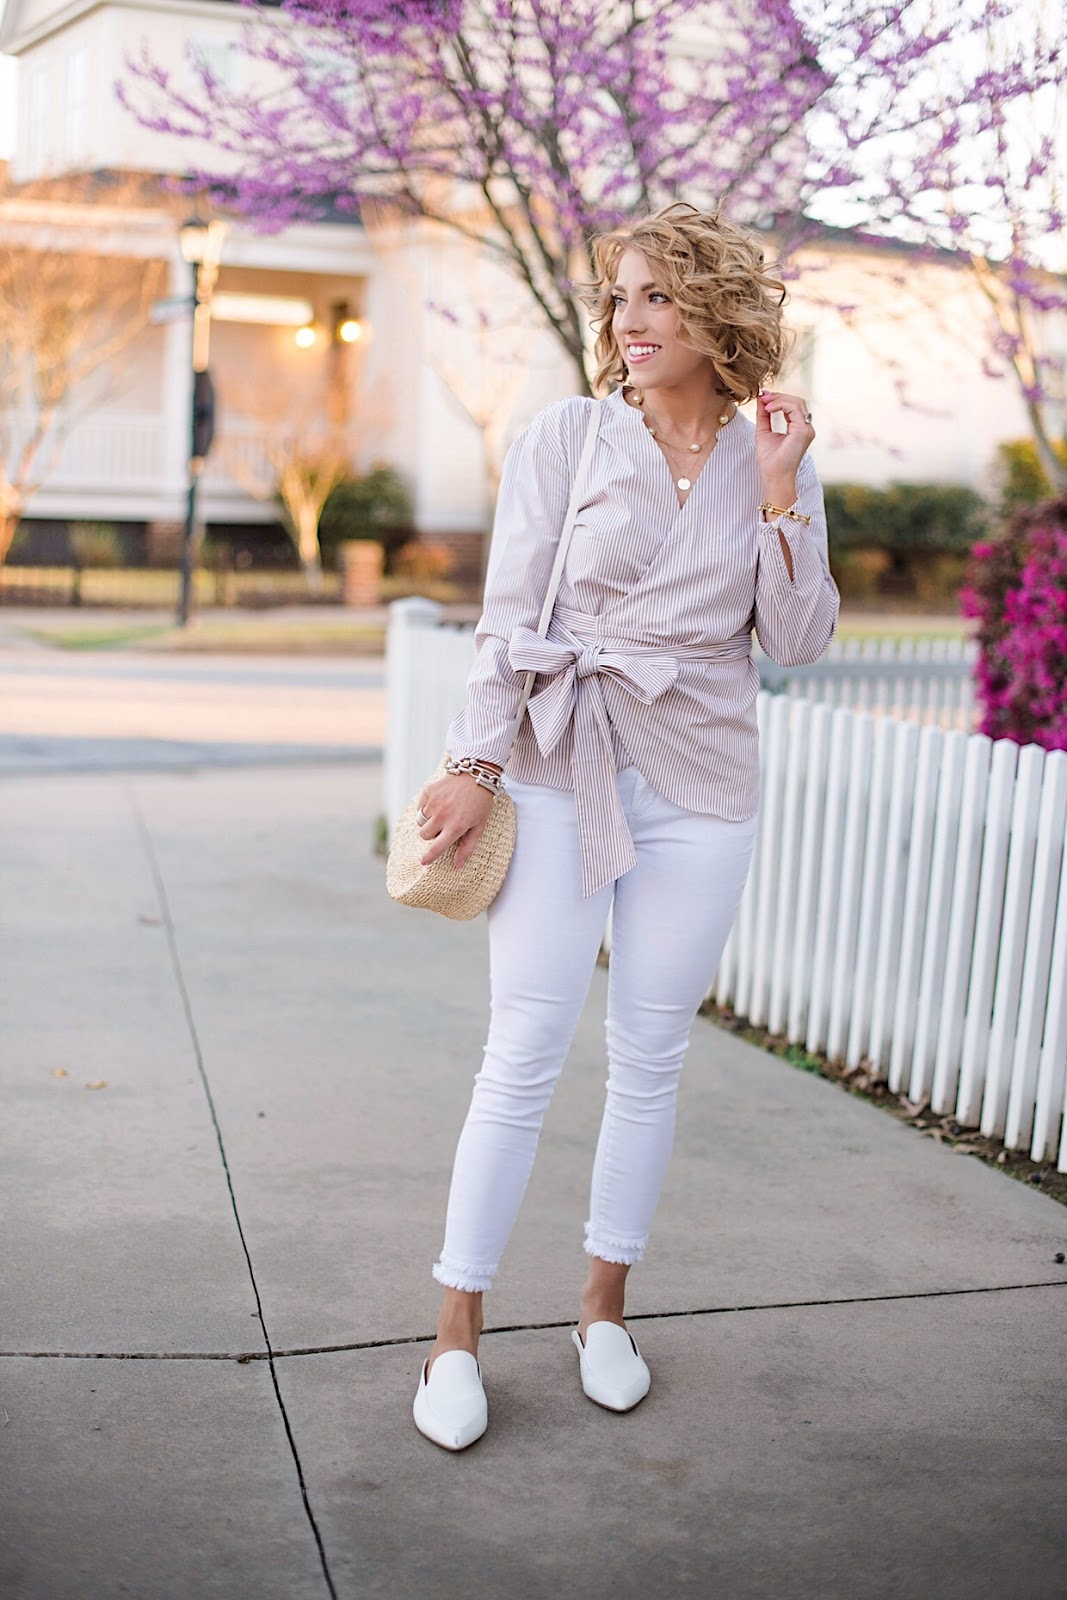 Spring Style J.Crew Wrap Top - Click through for the full post on Something Delightful Blog